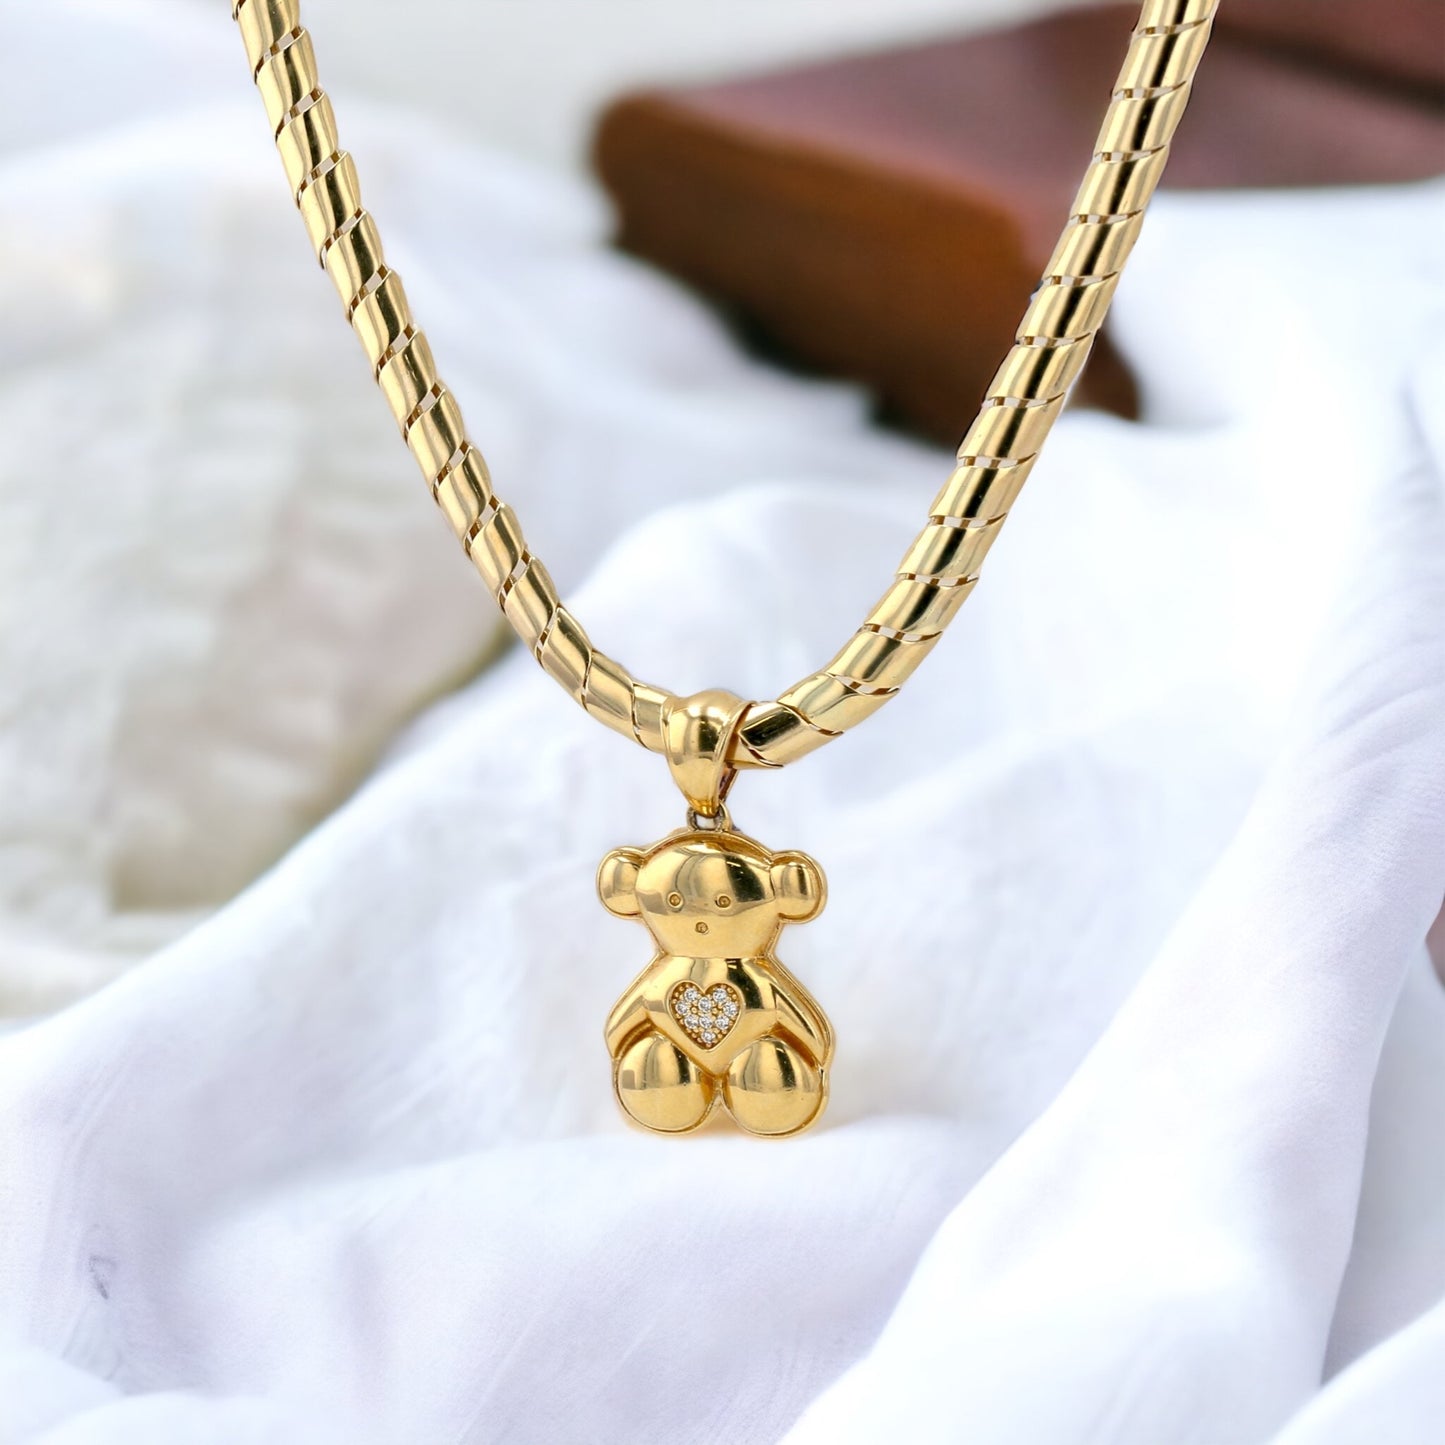 10K Yellow gold teddy bear necklace-221915